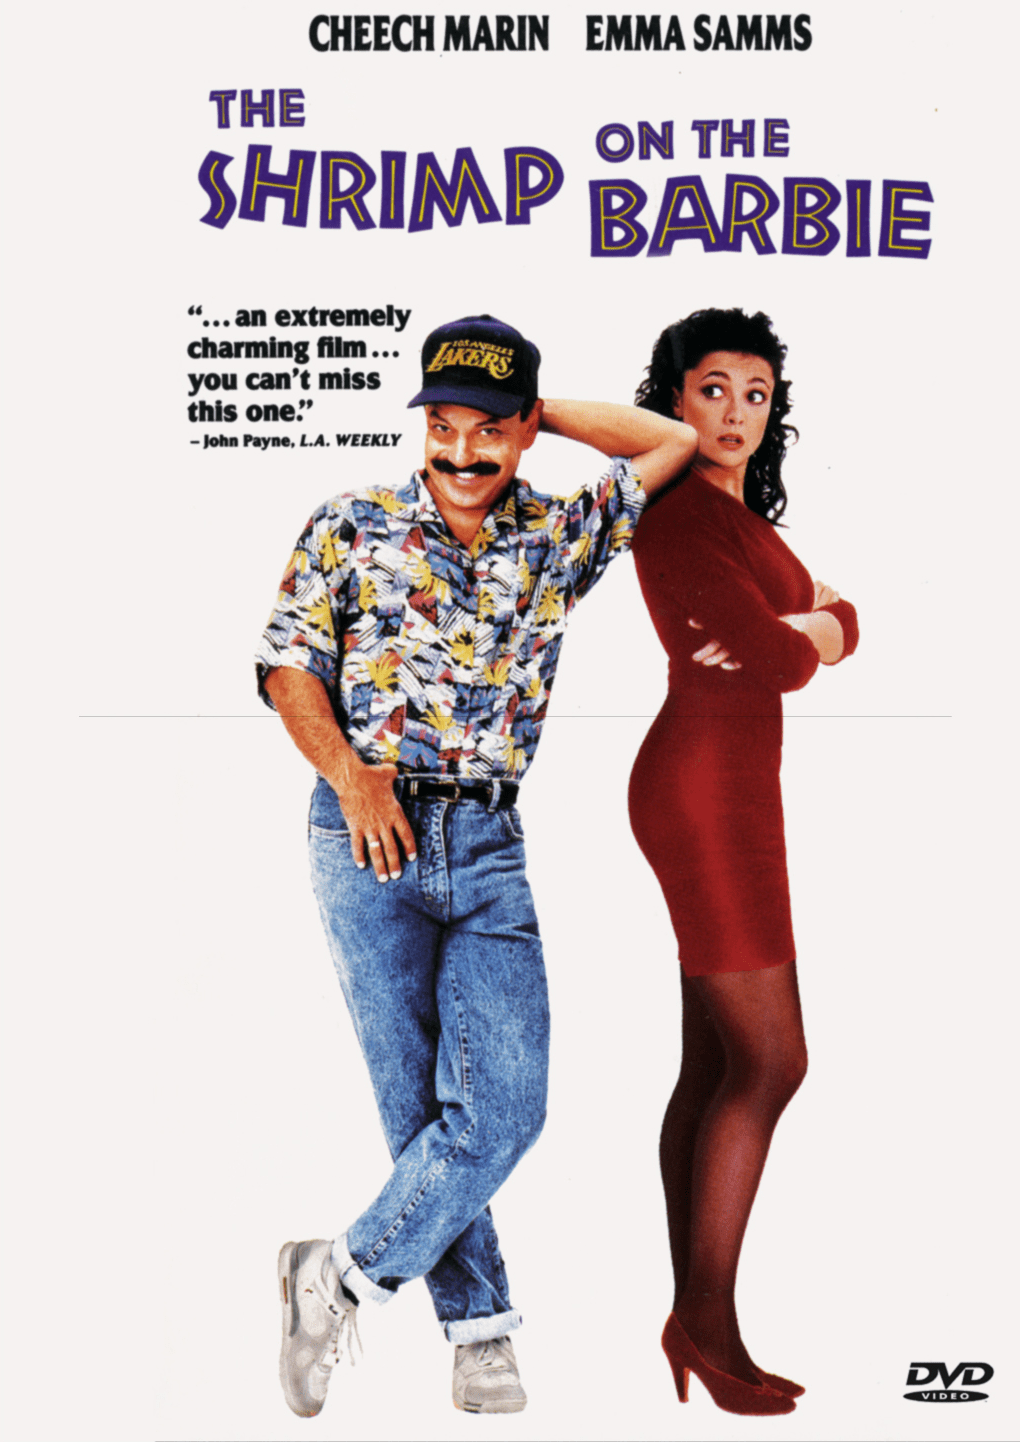 Shrimp on the Barbie DVD (1990) Shop Classic Movies On DVD